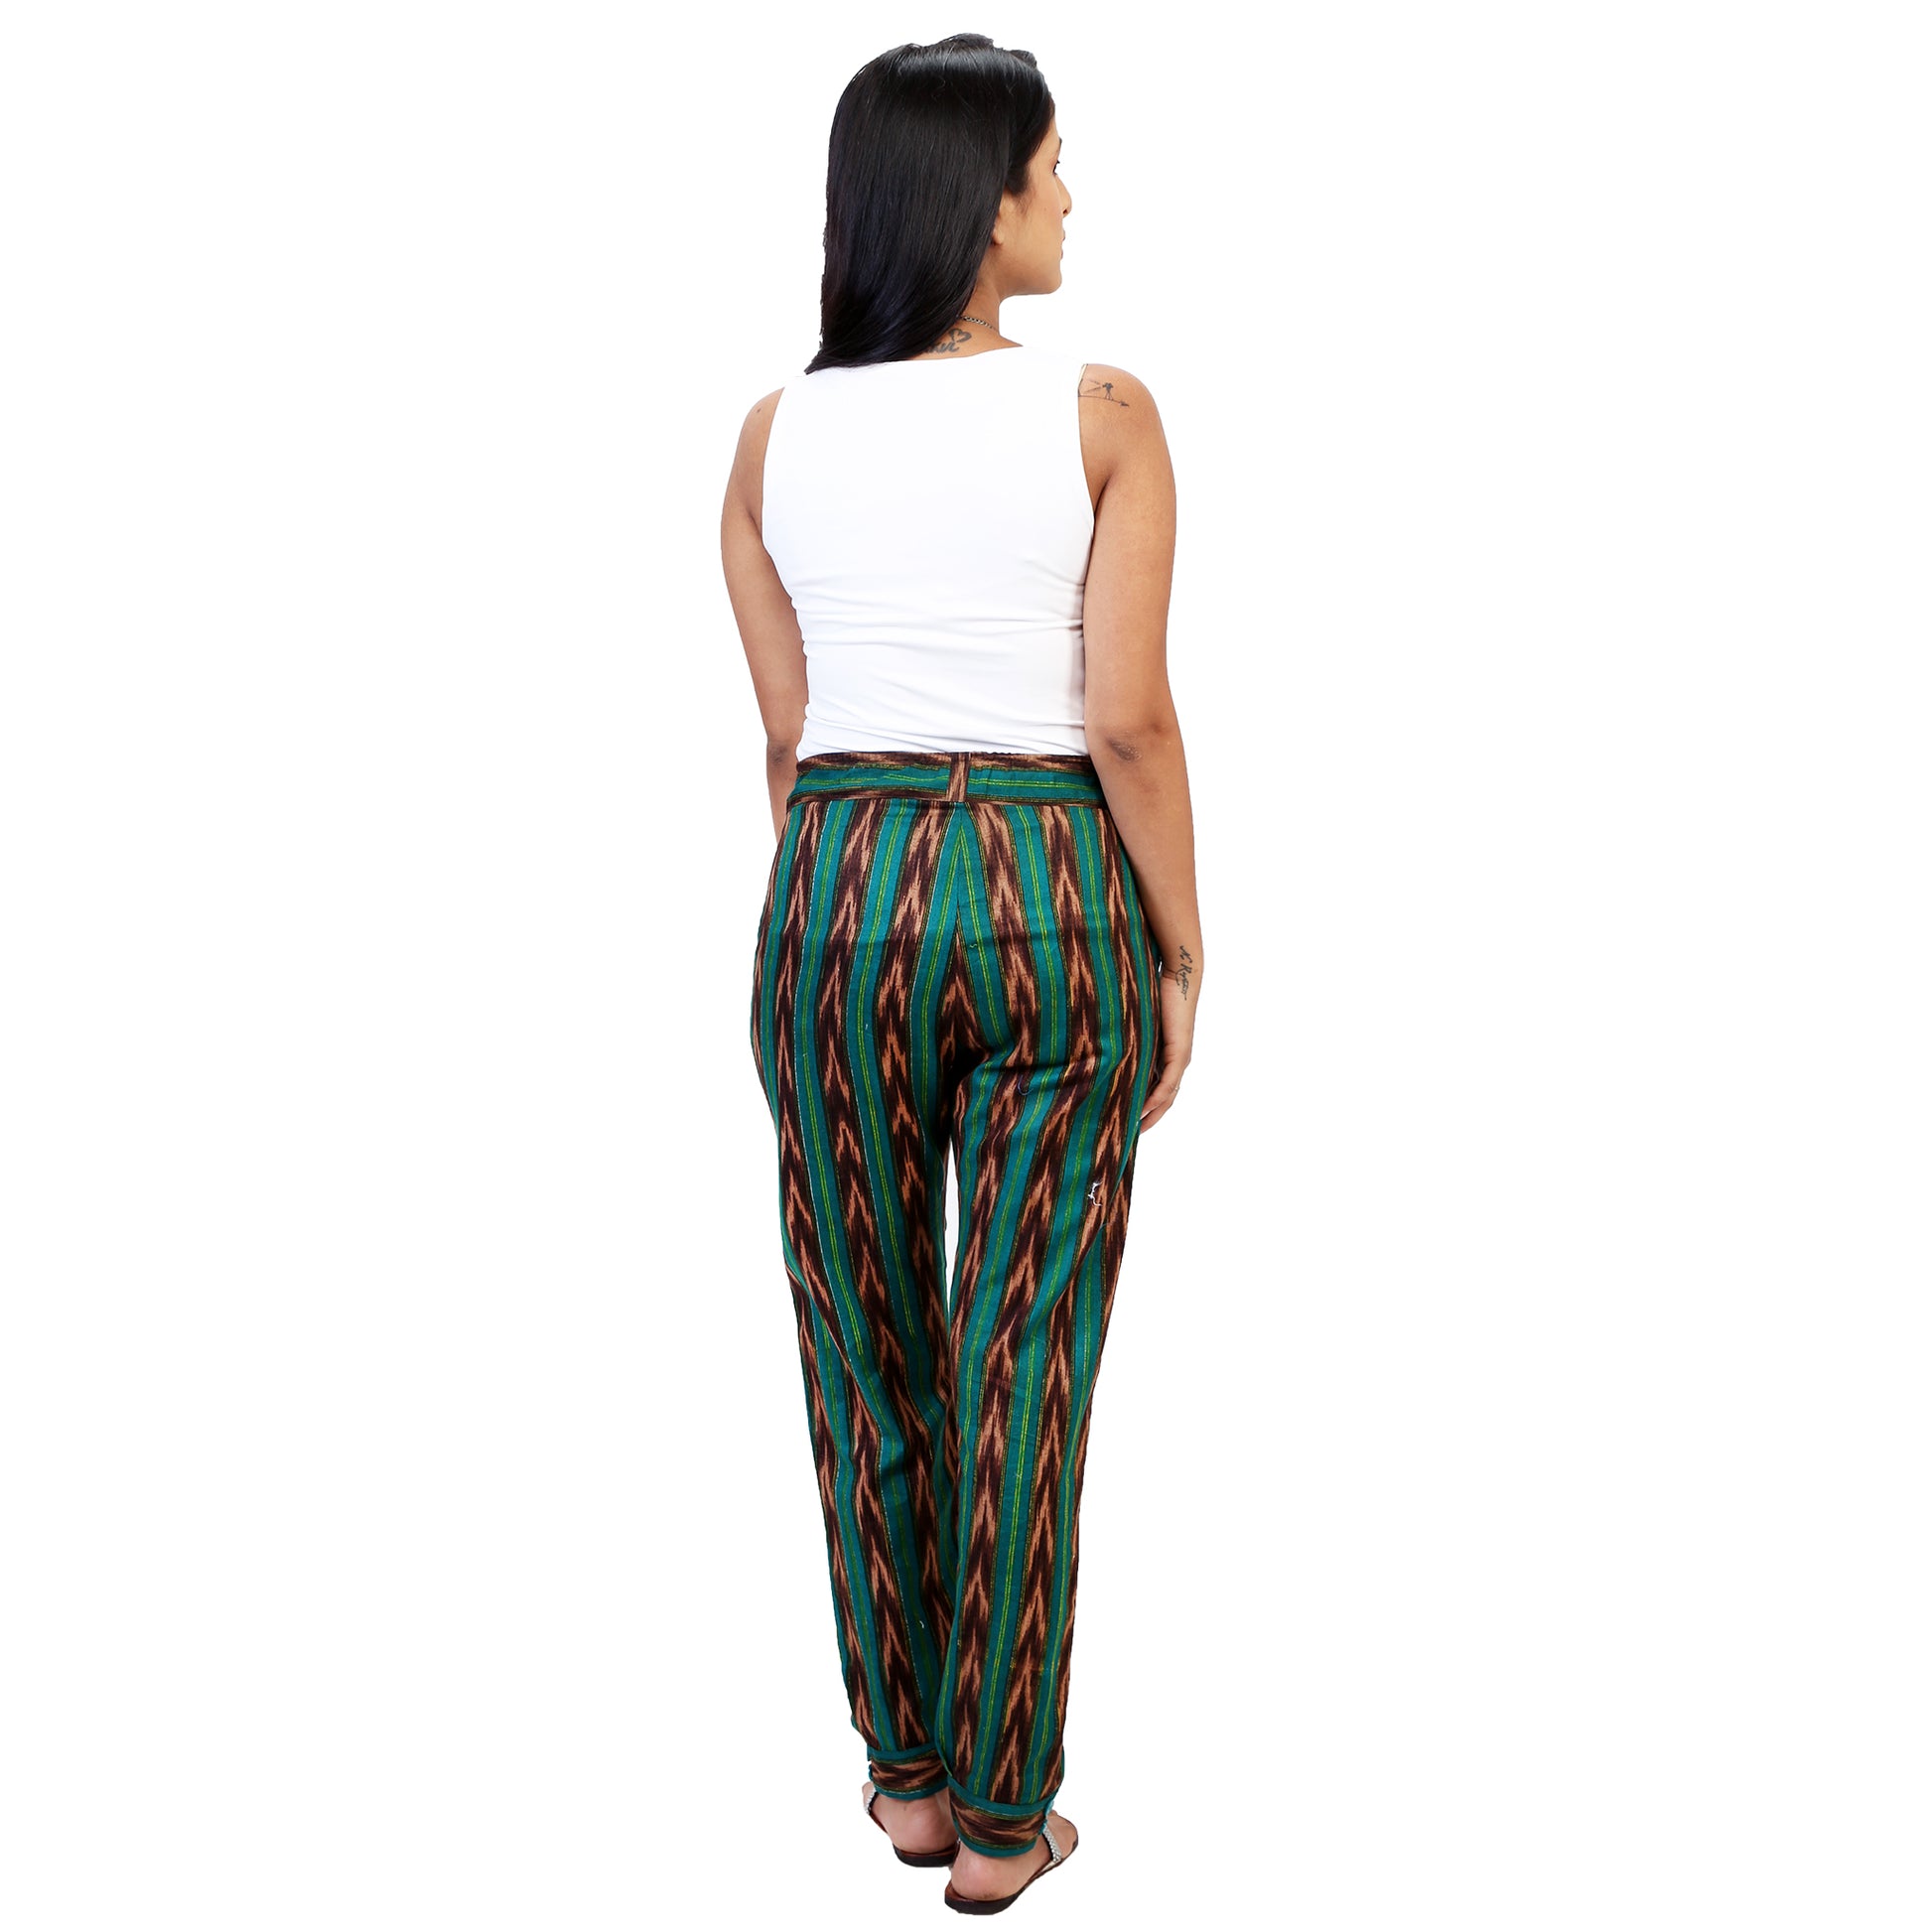 comfy ikat bottoms for women in green and black colour